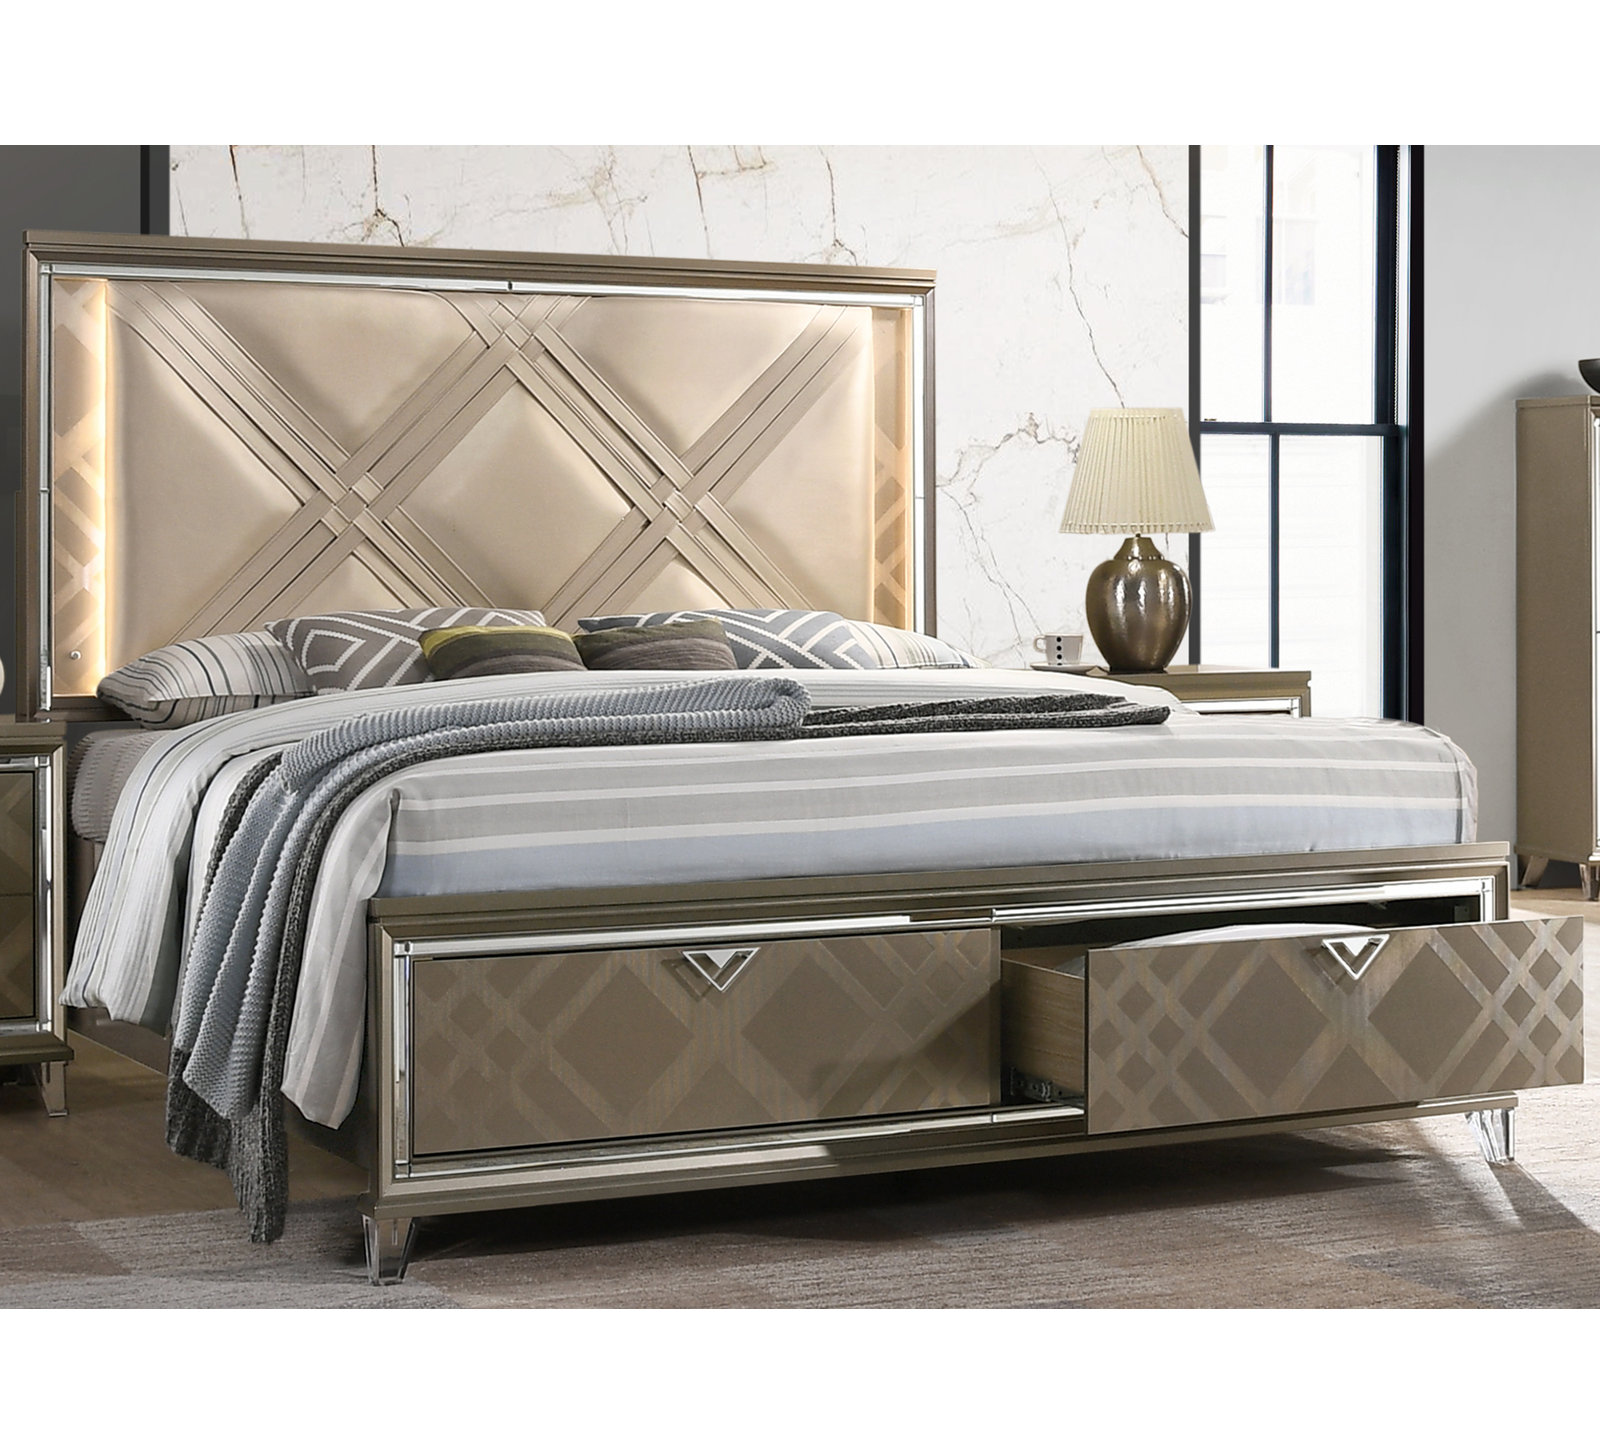 Everly Quinn Valentia Upholstered Storage Bed